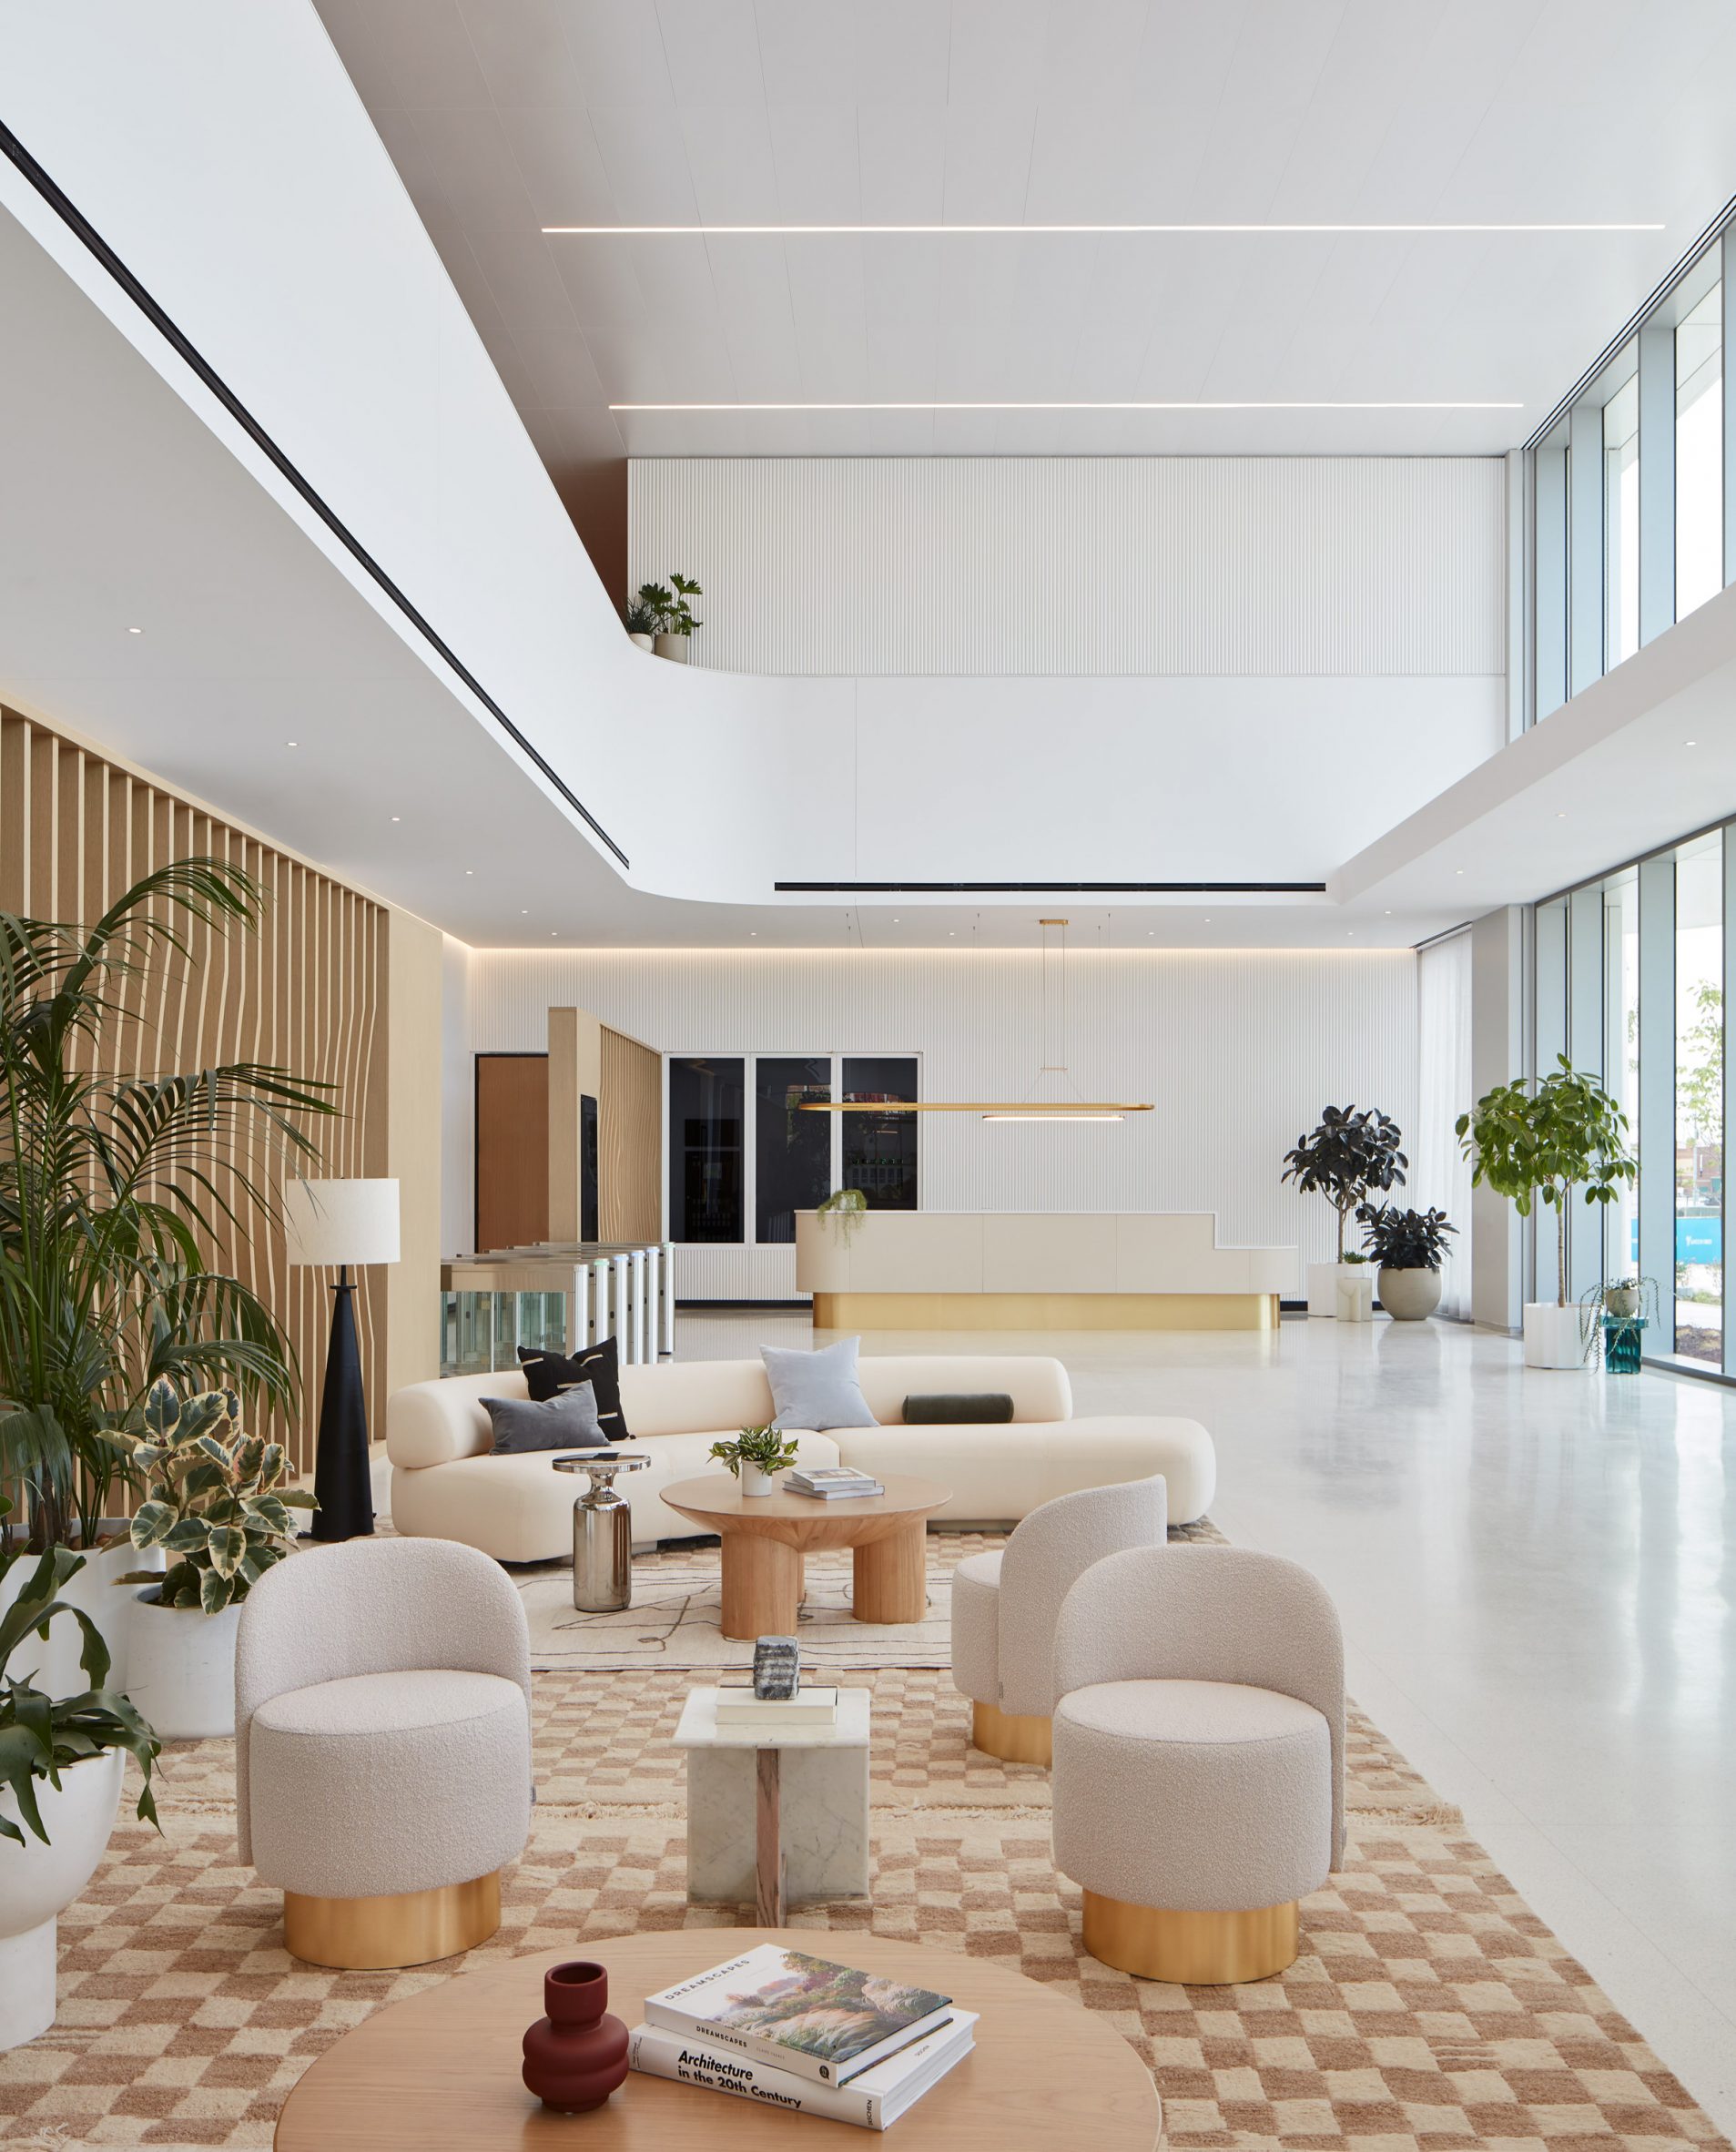 Double-height lobby with lounge-like seating areas